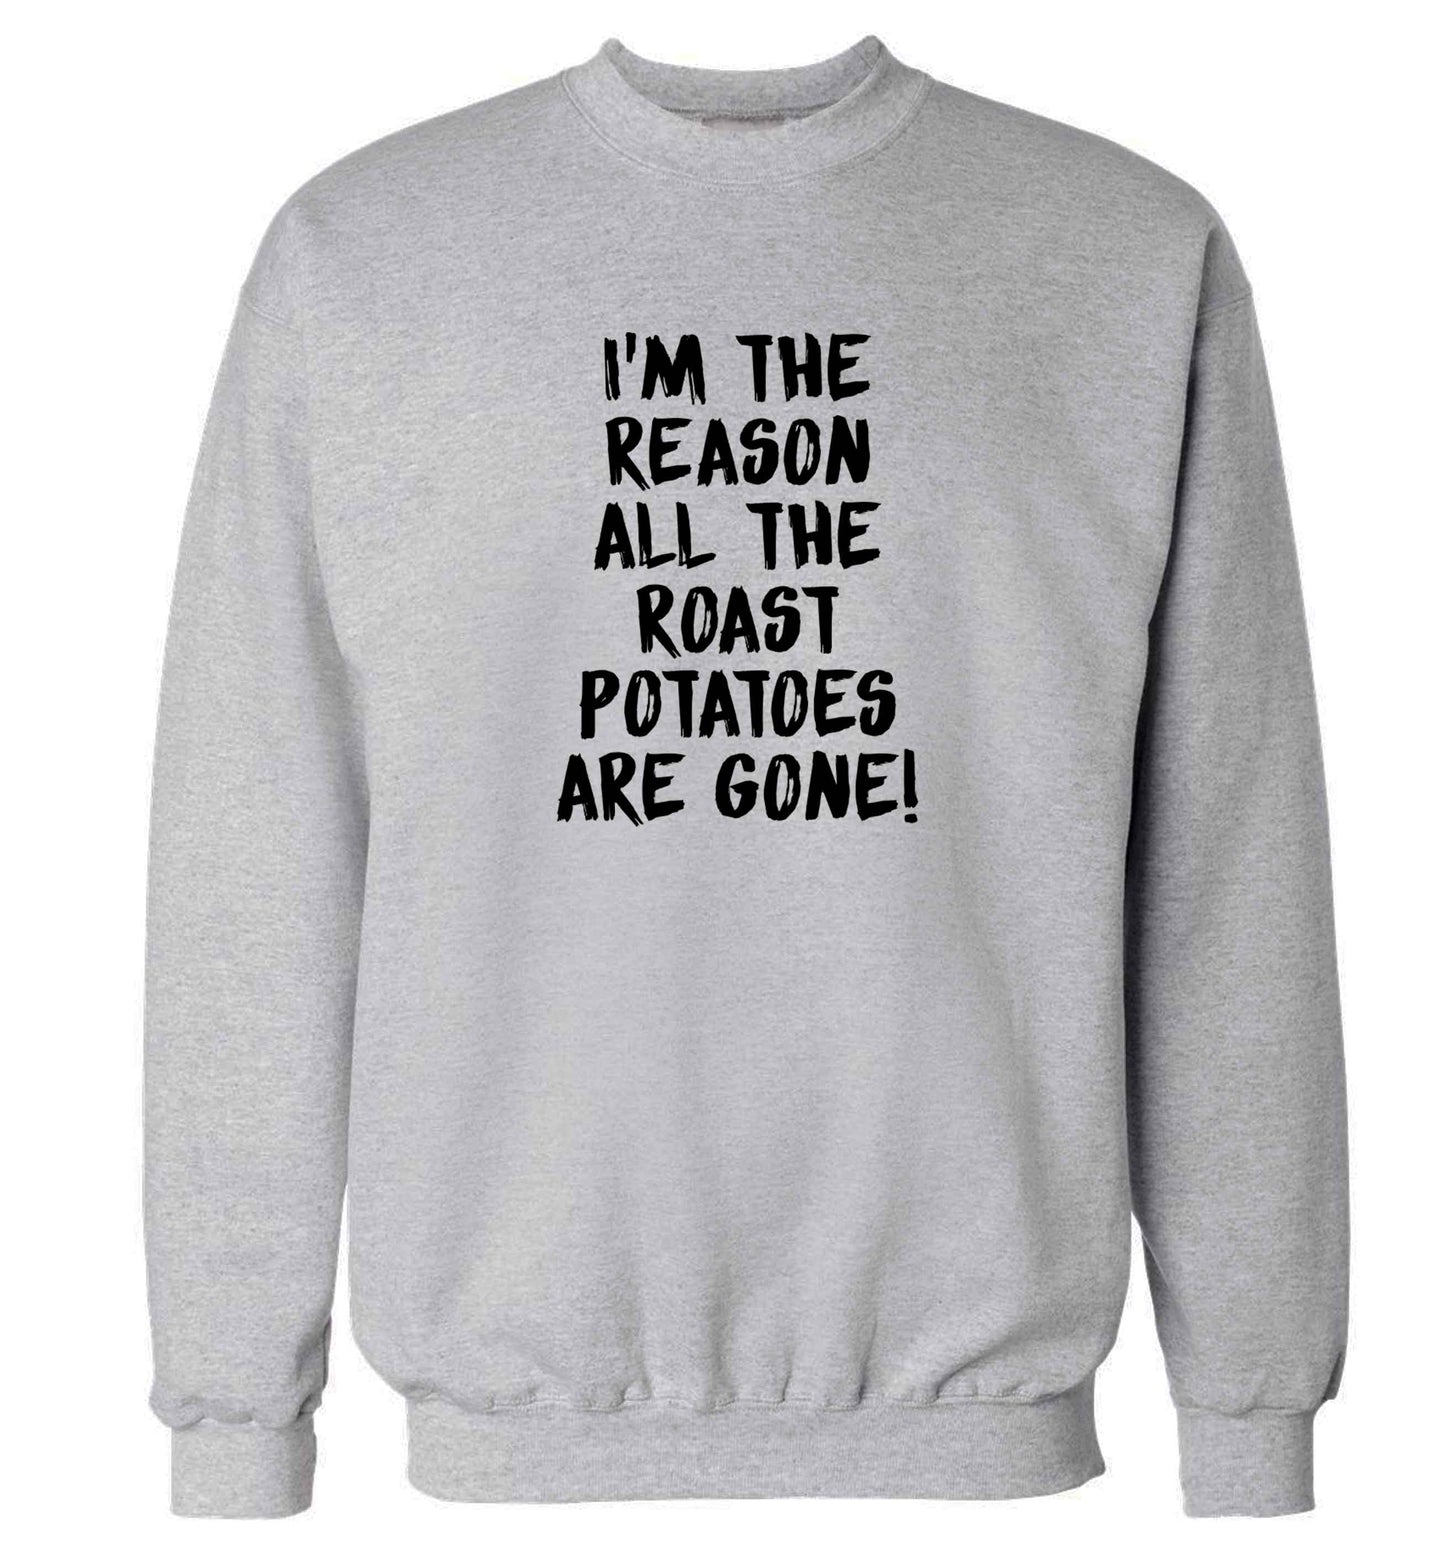 I'm the reason all the roast potatoes are gone adult's unisex grey sweater 2XL